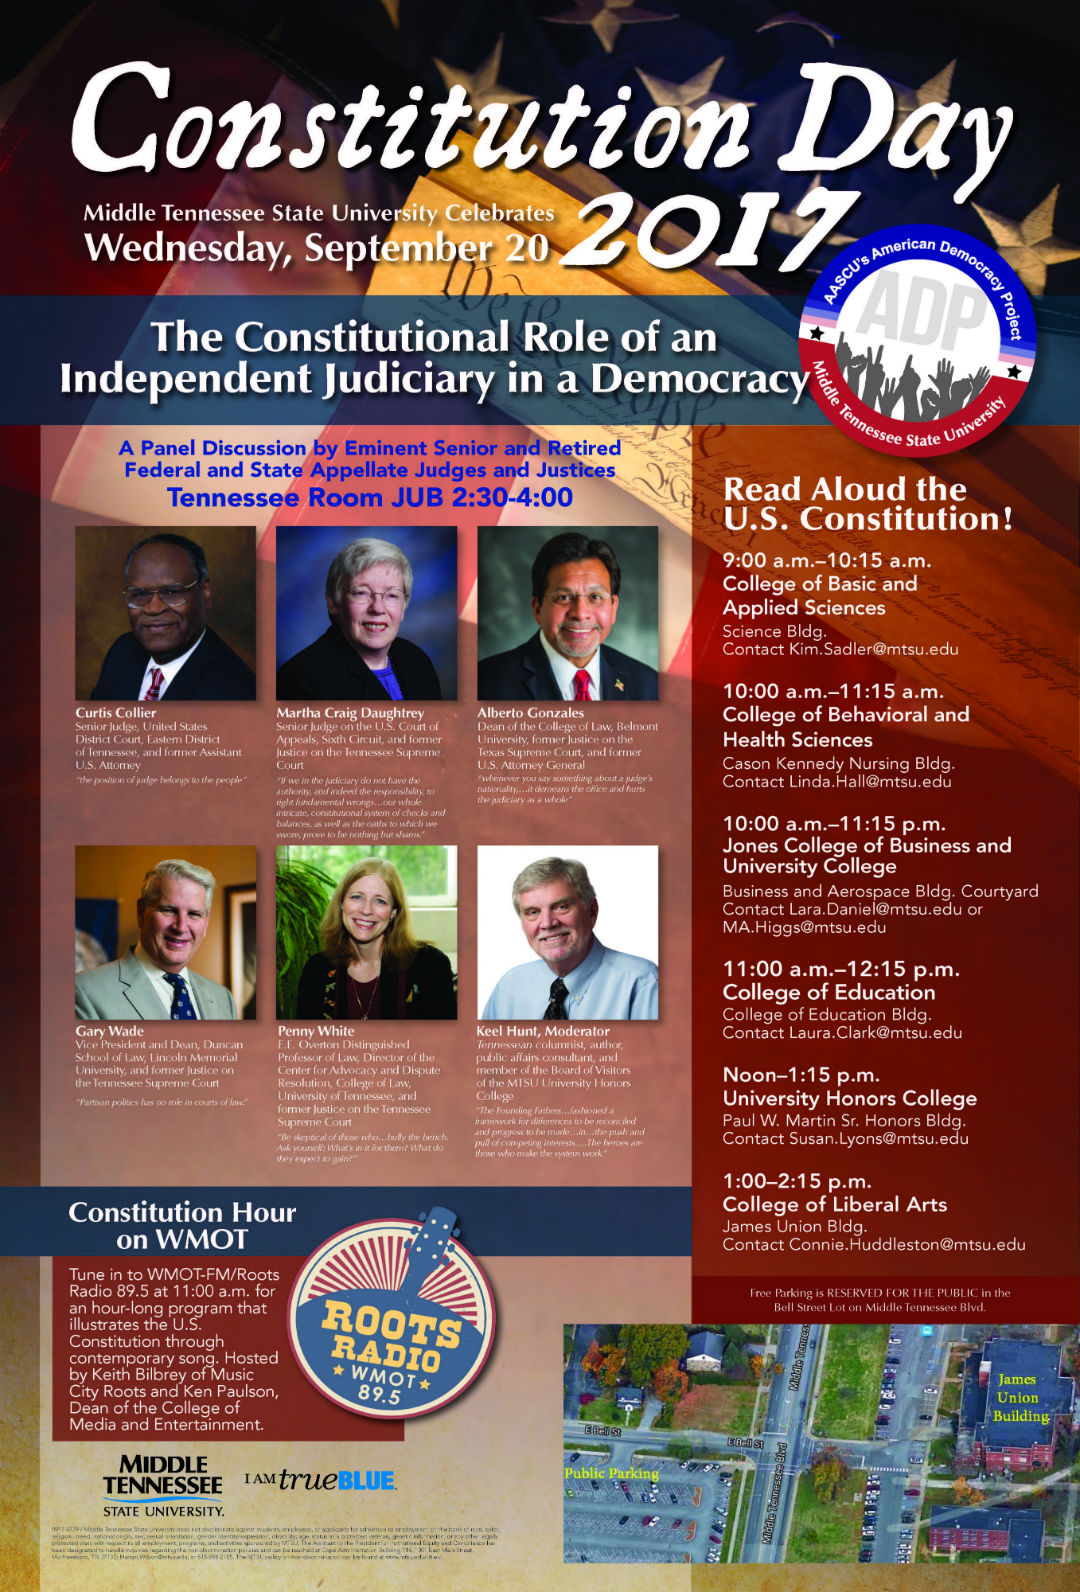 2017 Constitution Day Poster with times of the Constitution read alouds across campus and the 2:30pm Panel discussion of an Independent Judiciary in a Democracy